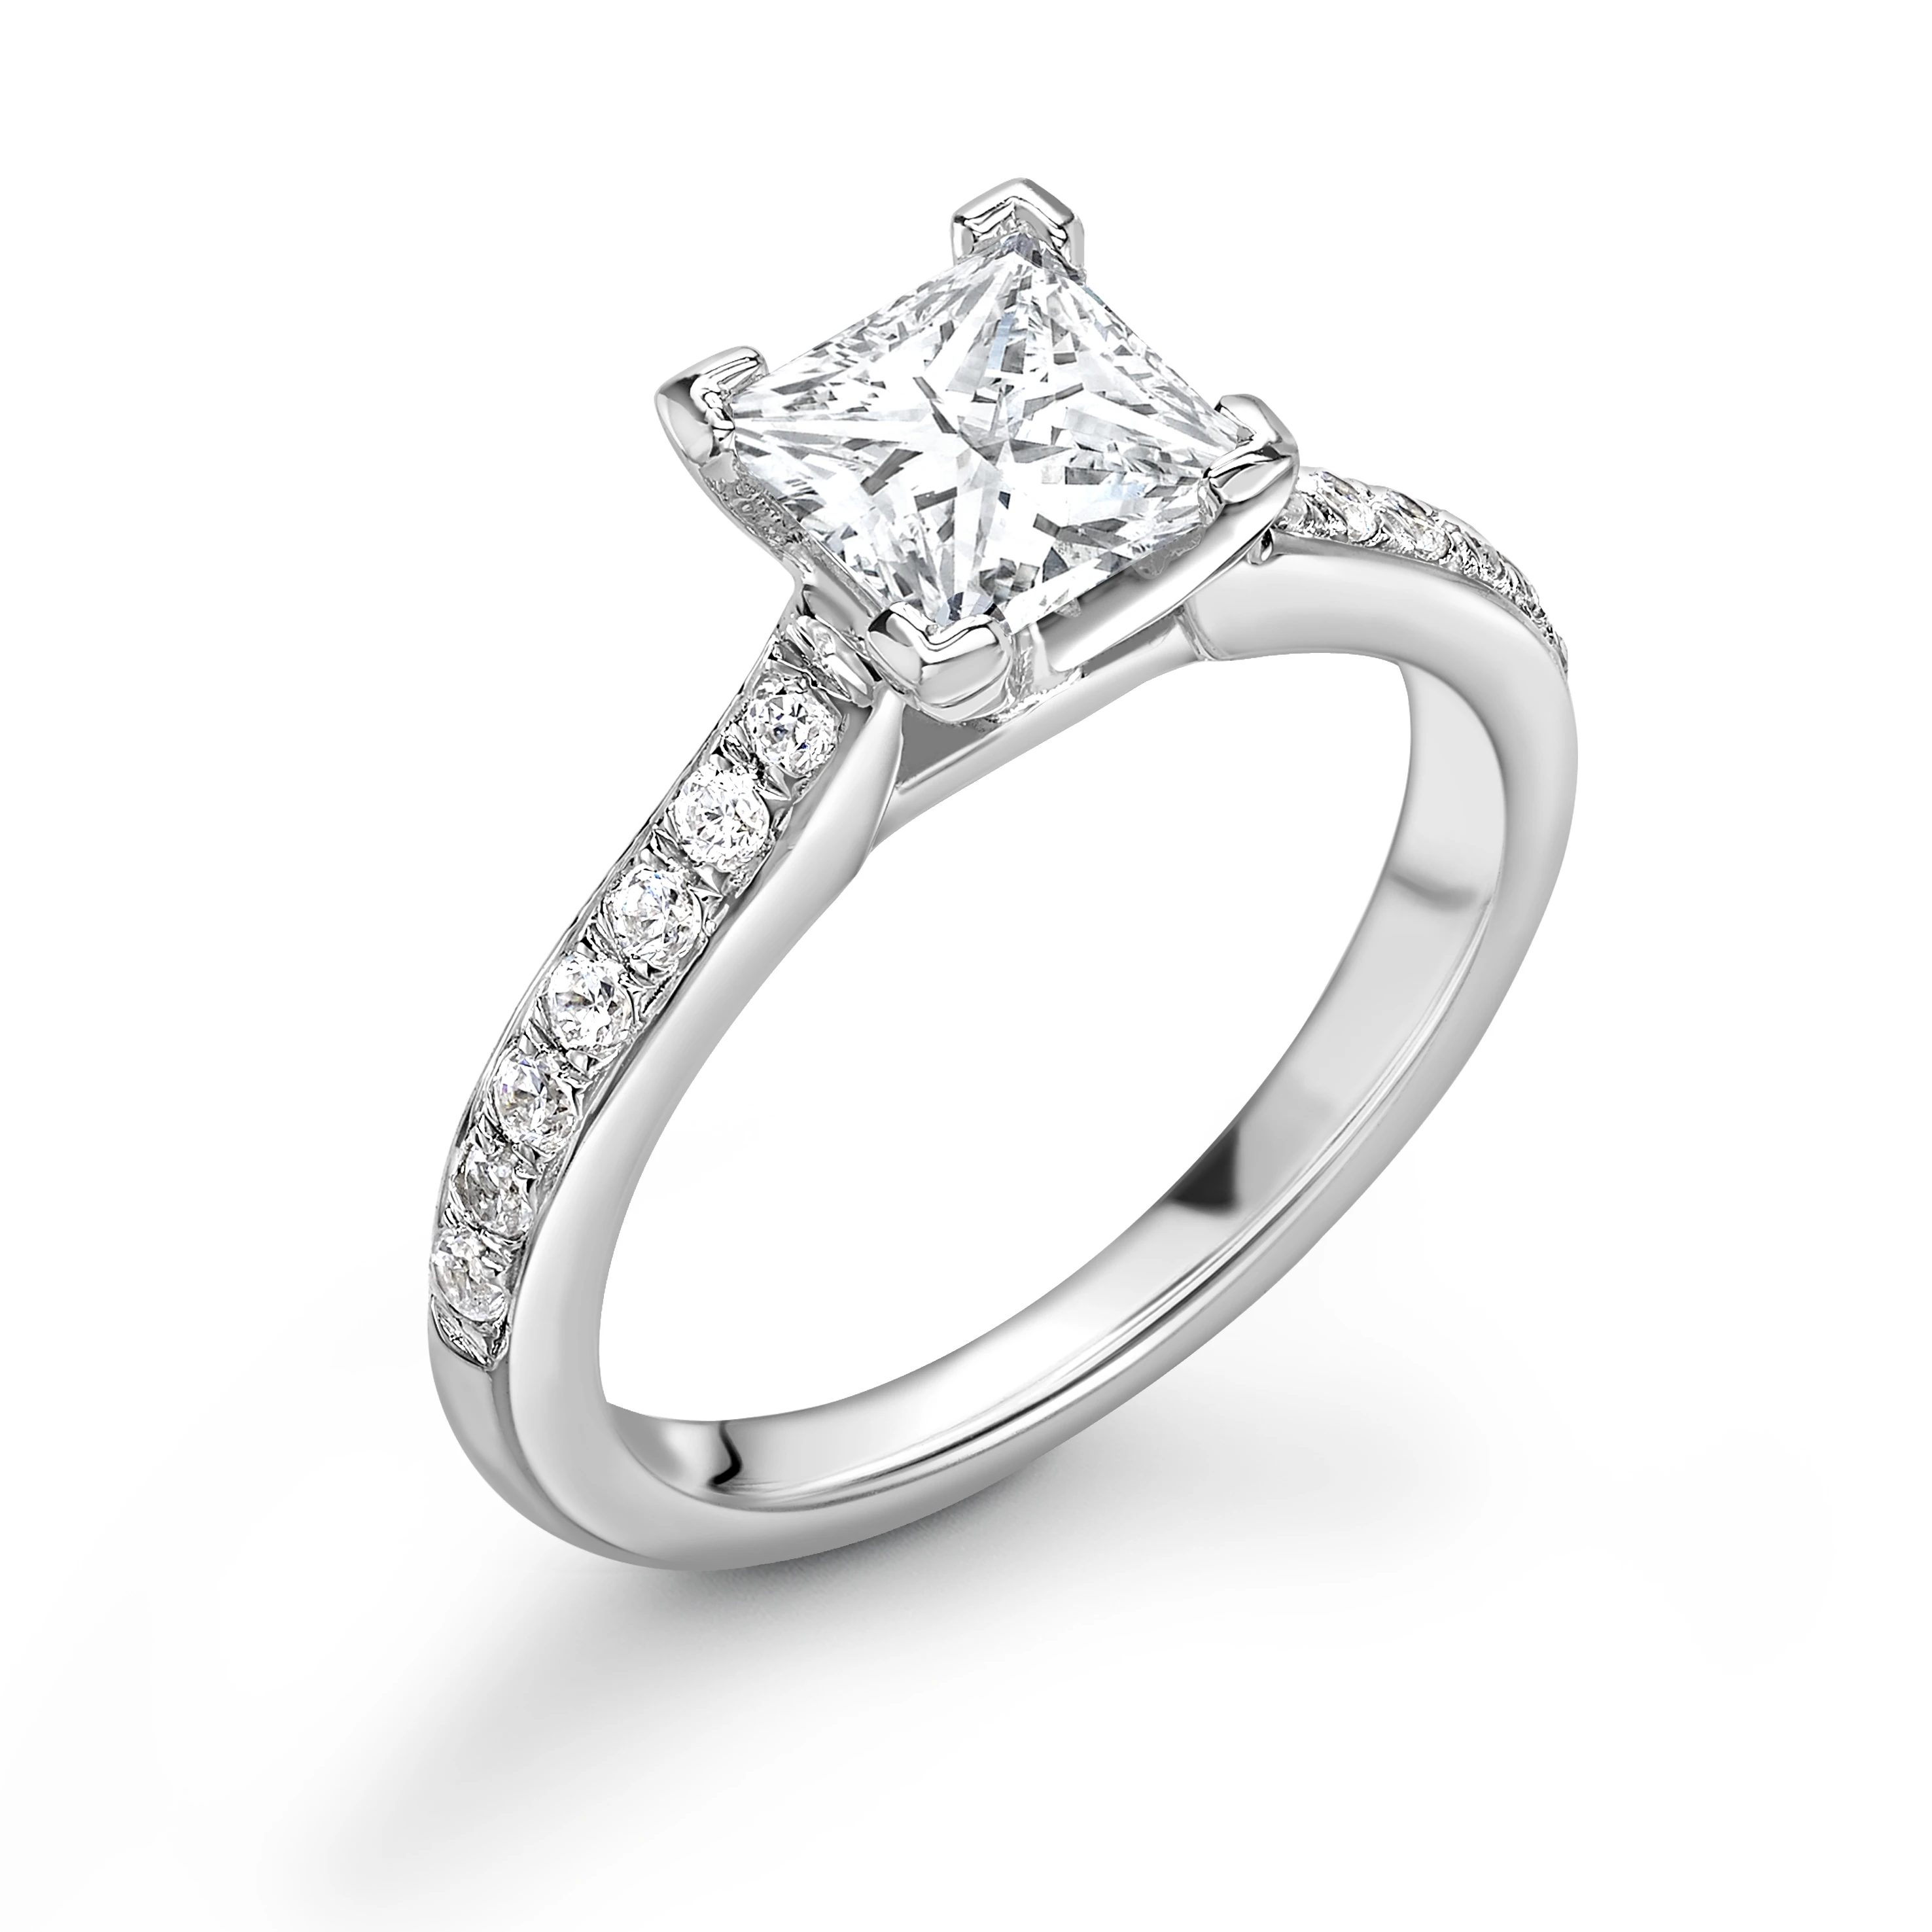 Round Shape Pave Setting Wide Shoulder Diamond Engagement Ring